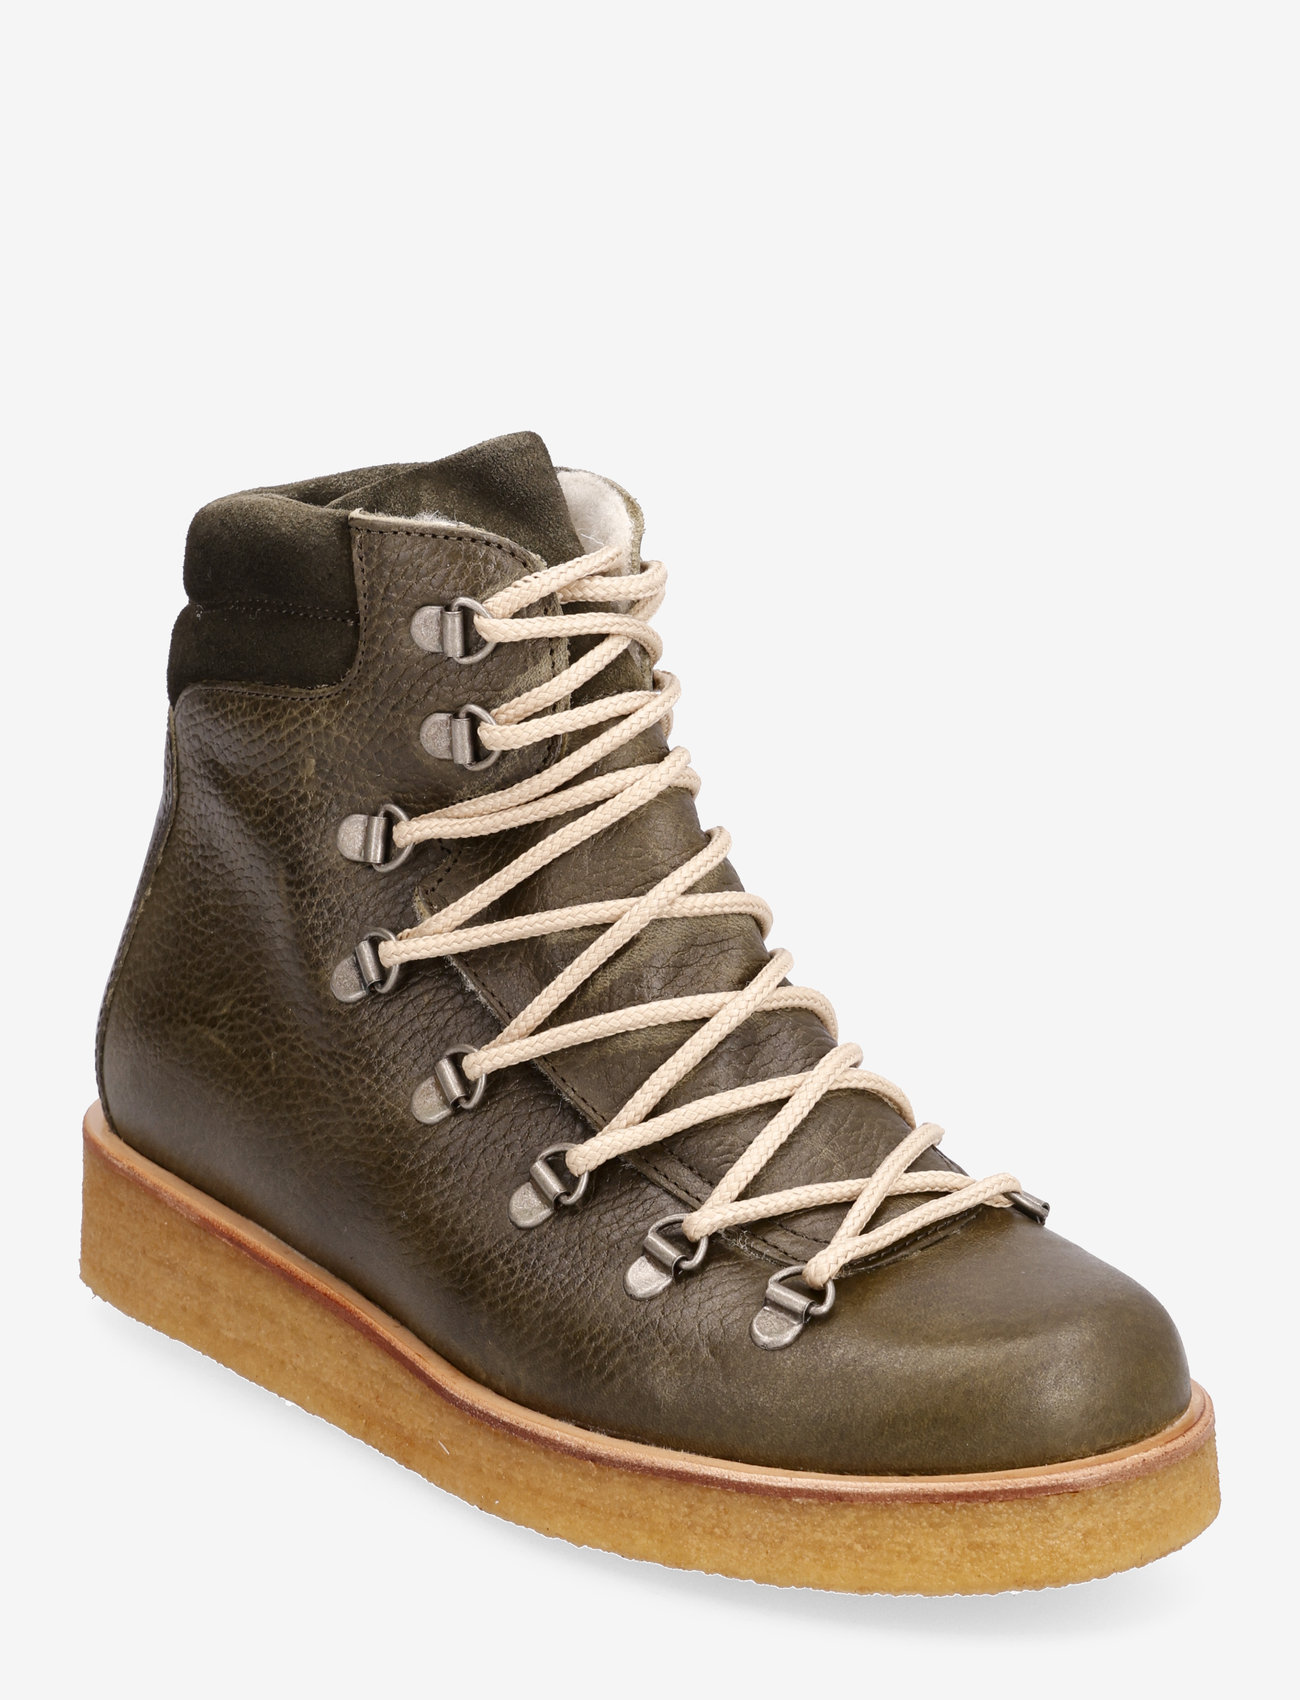 ANGULUS - Boots - flat - with laces - flate ankelstøvletter - 1724/2244 moss green/dark gree - 0